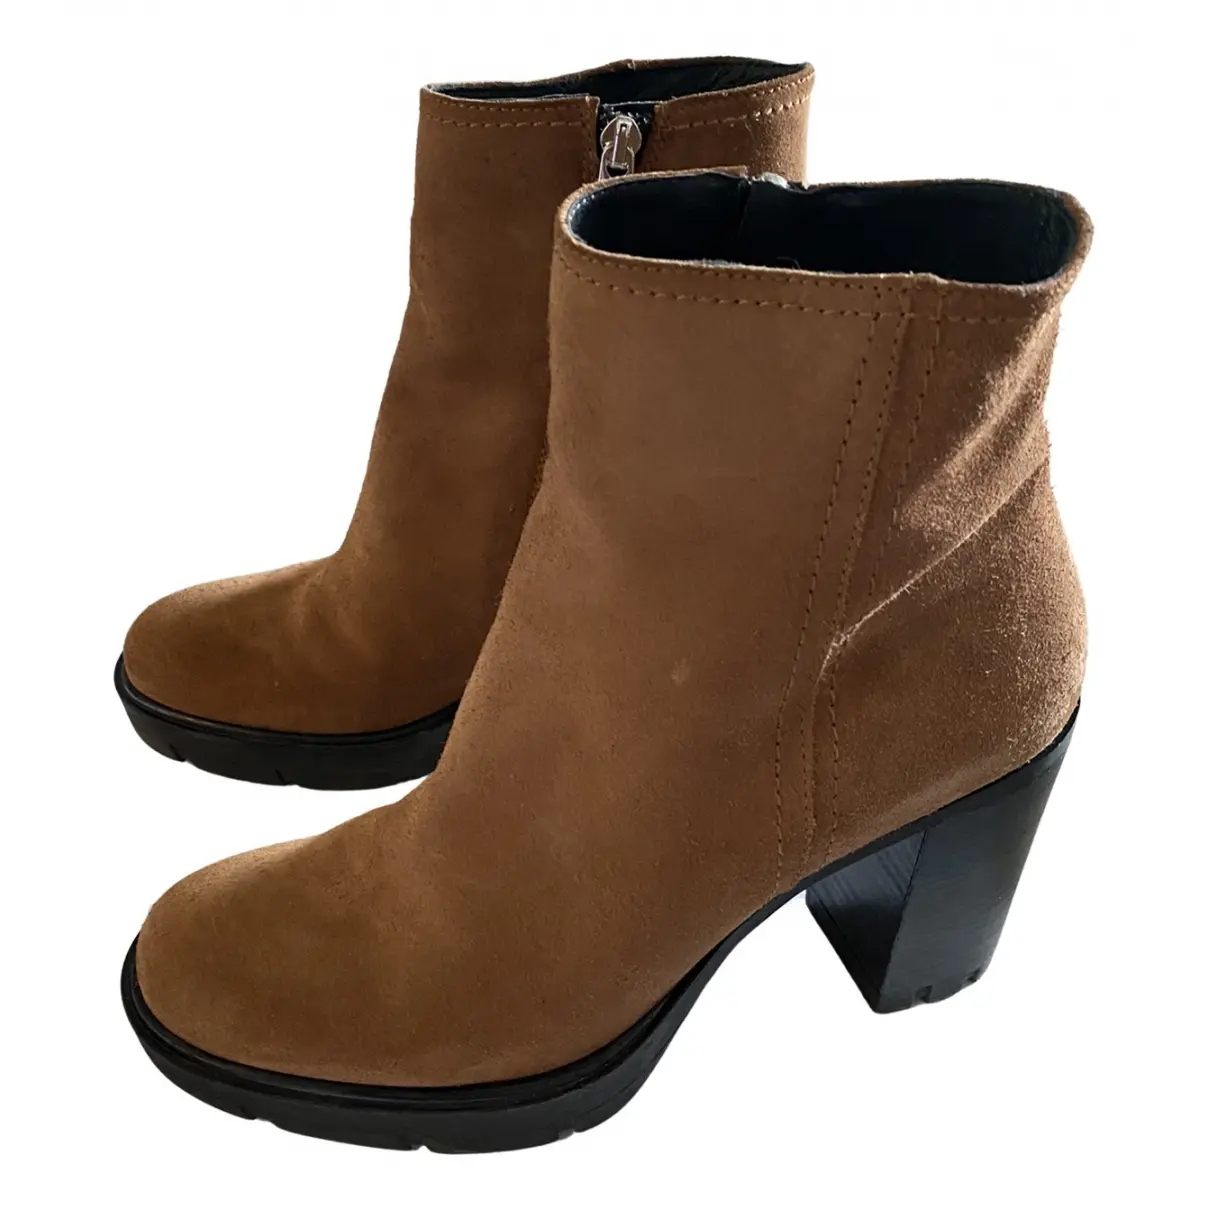 Ankle boots Janet Sport